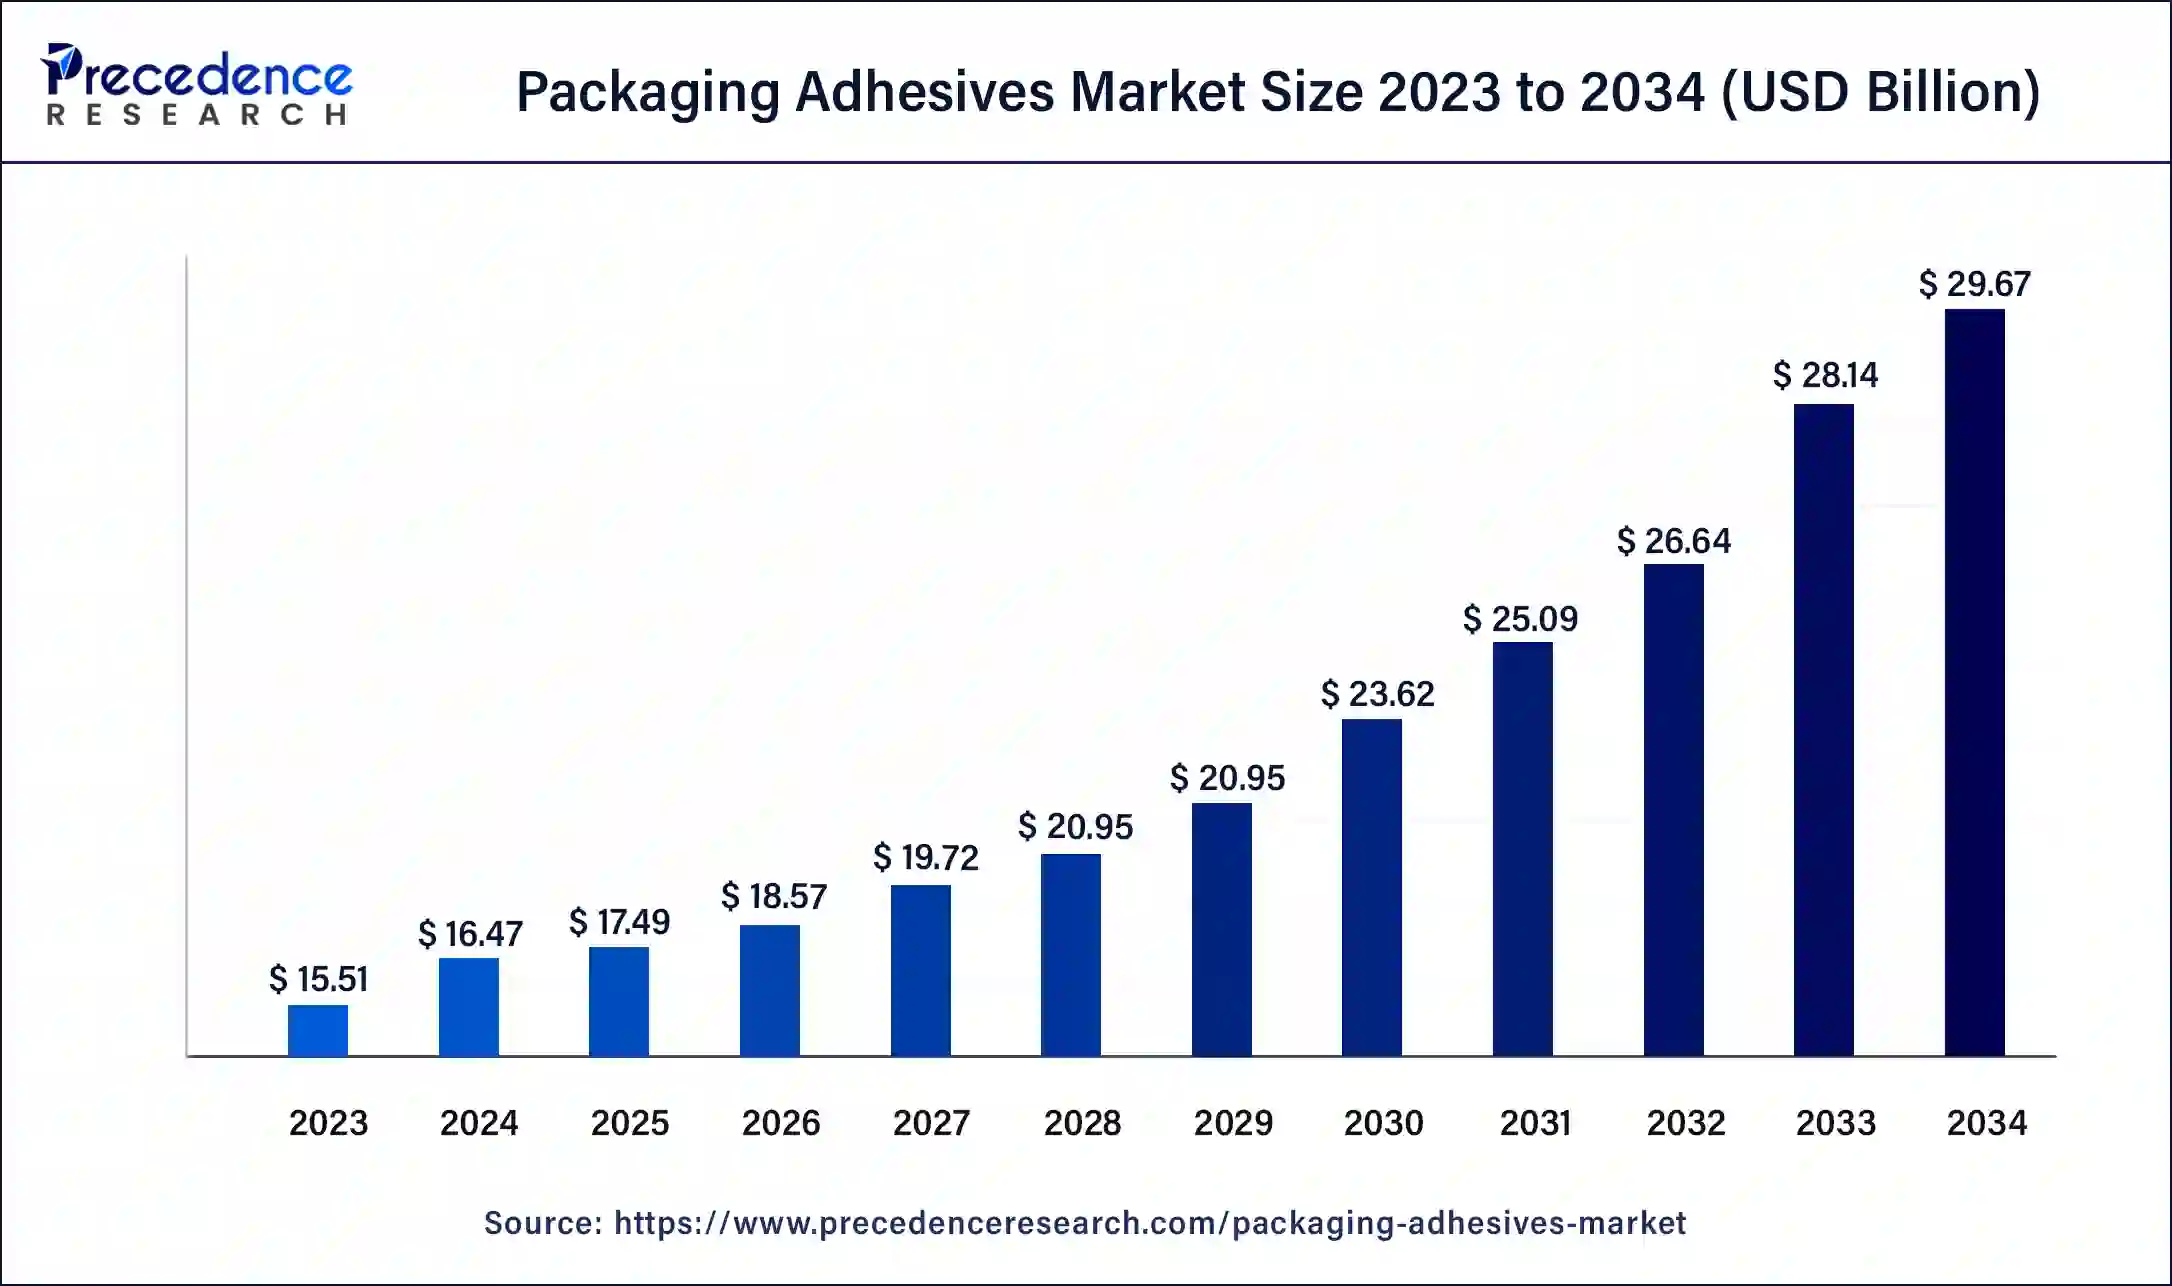 Packaging Adhesives Market Size 2024 To 2034